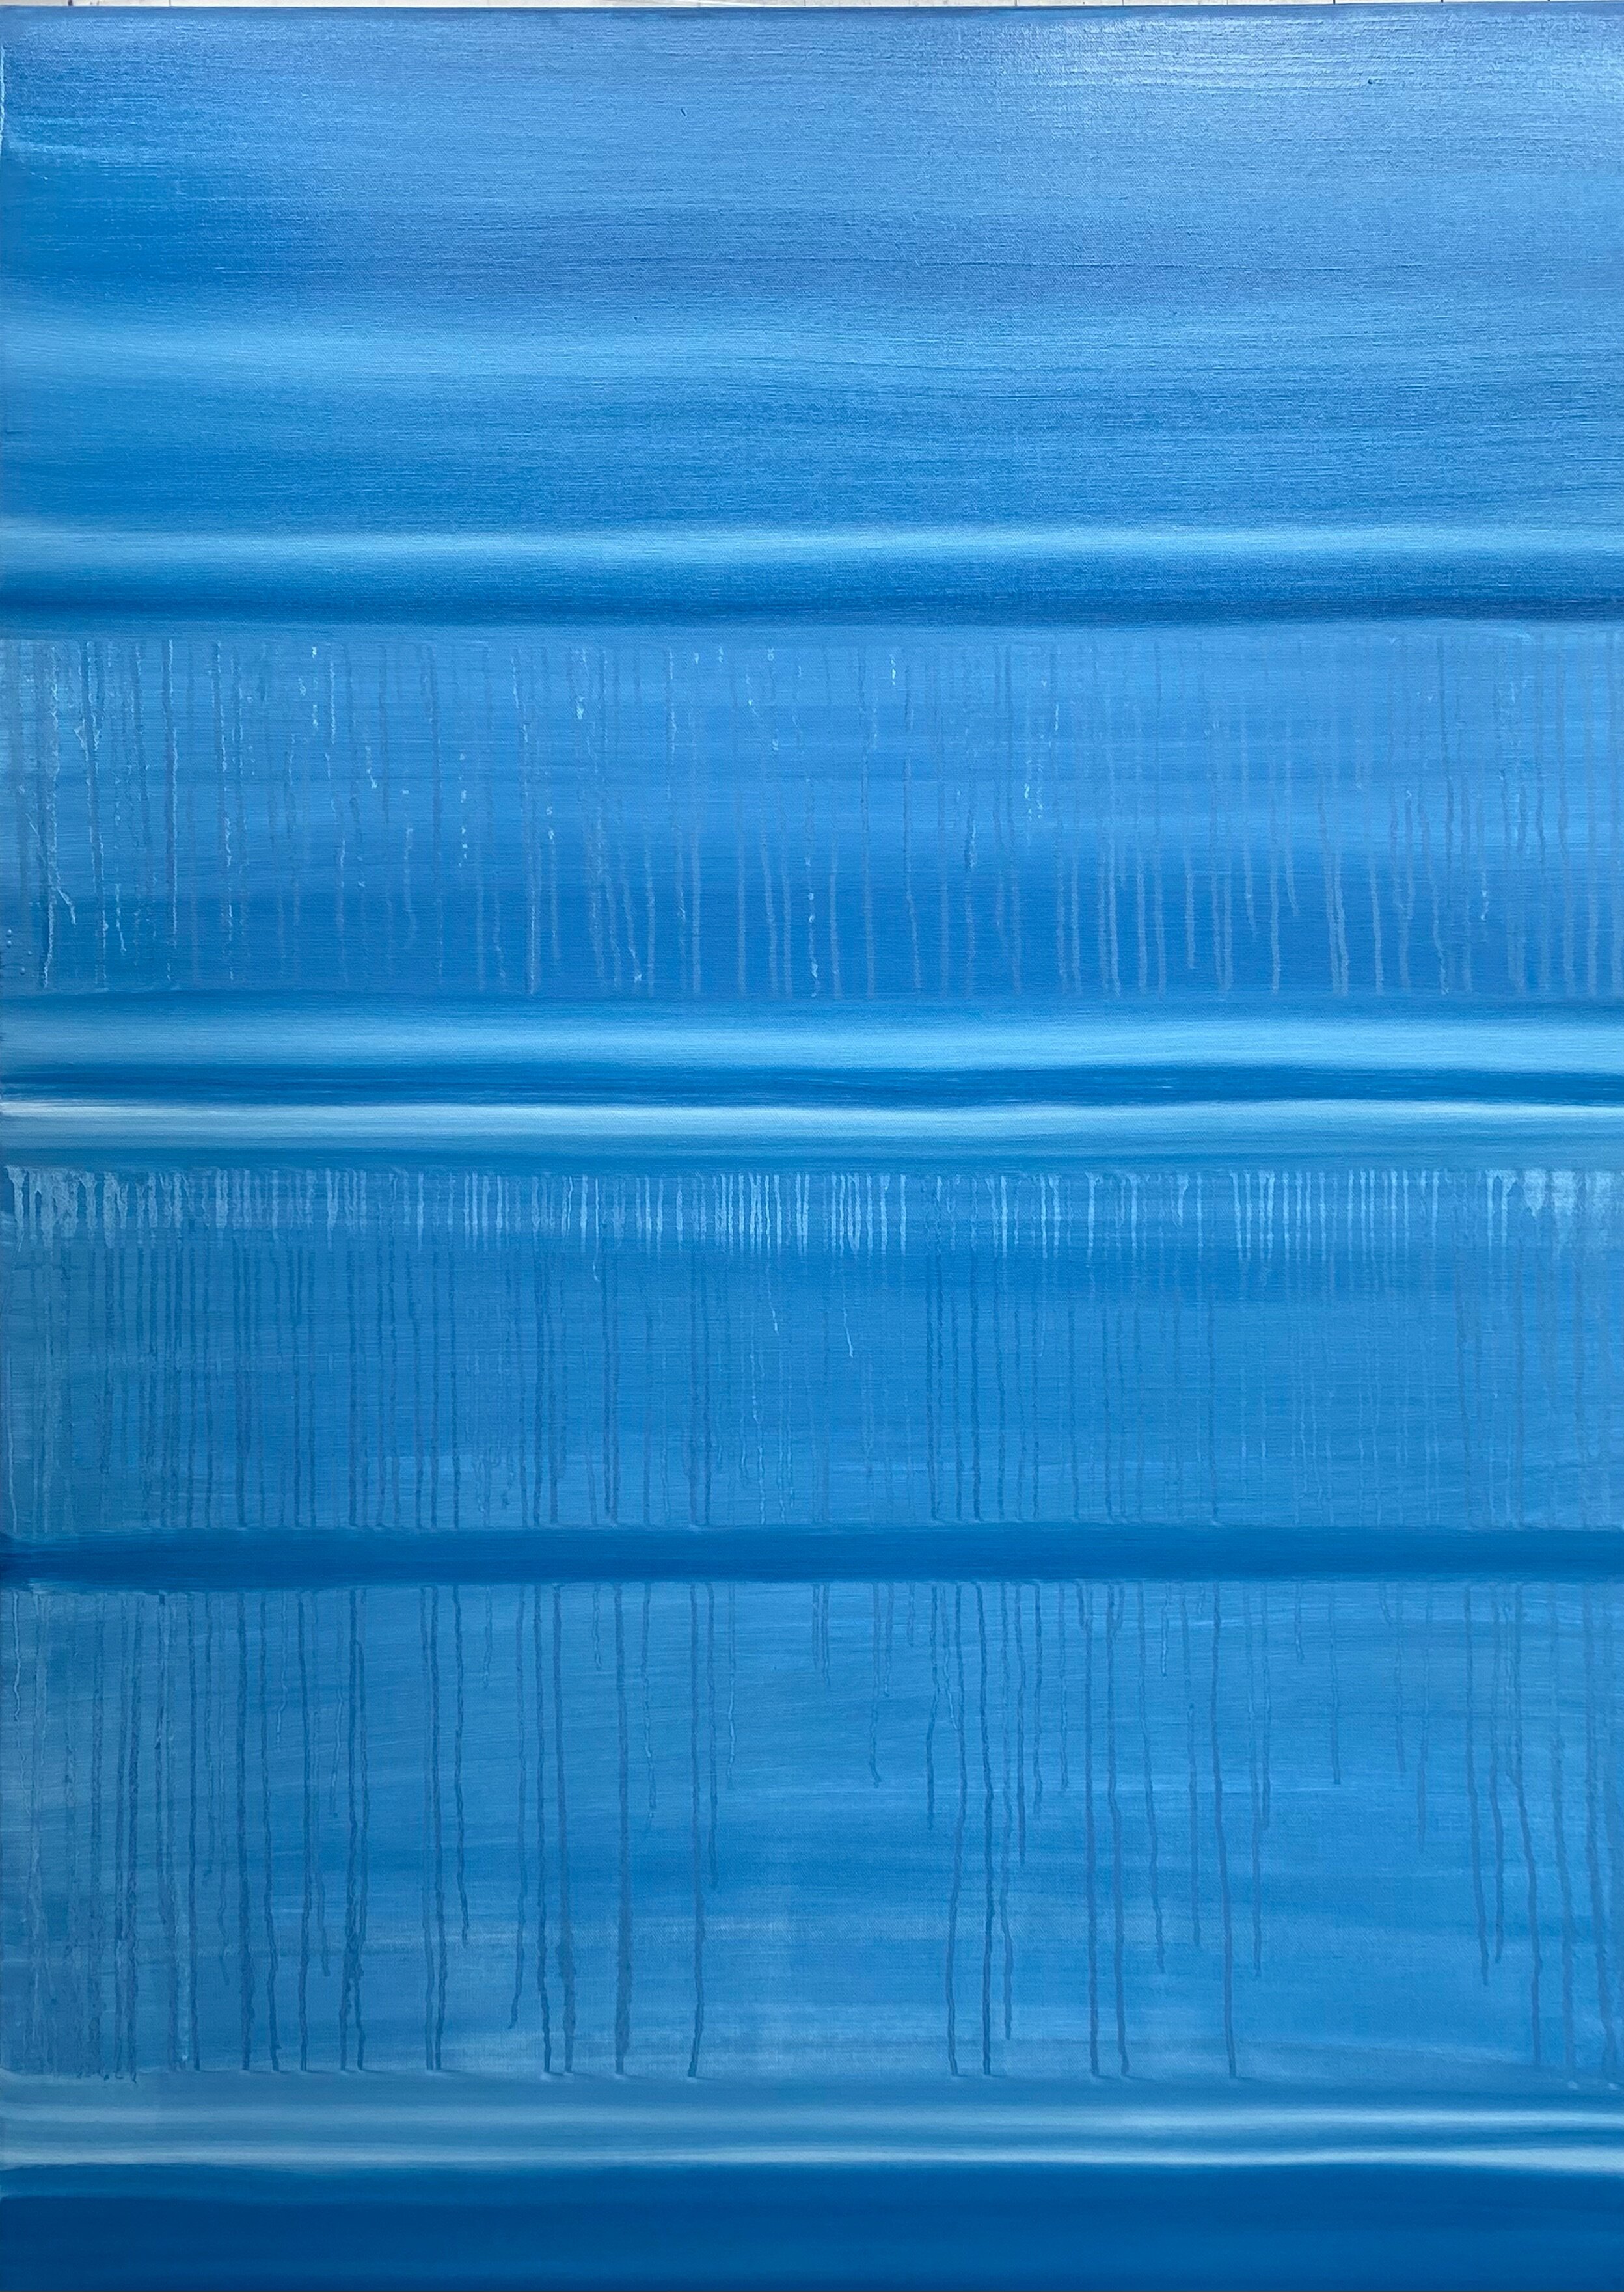 Blue 2, Oil on canvas, 48 x 36 inches, $6000